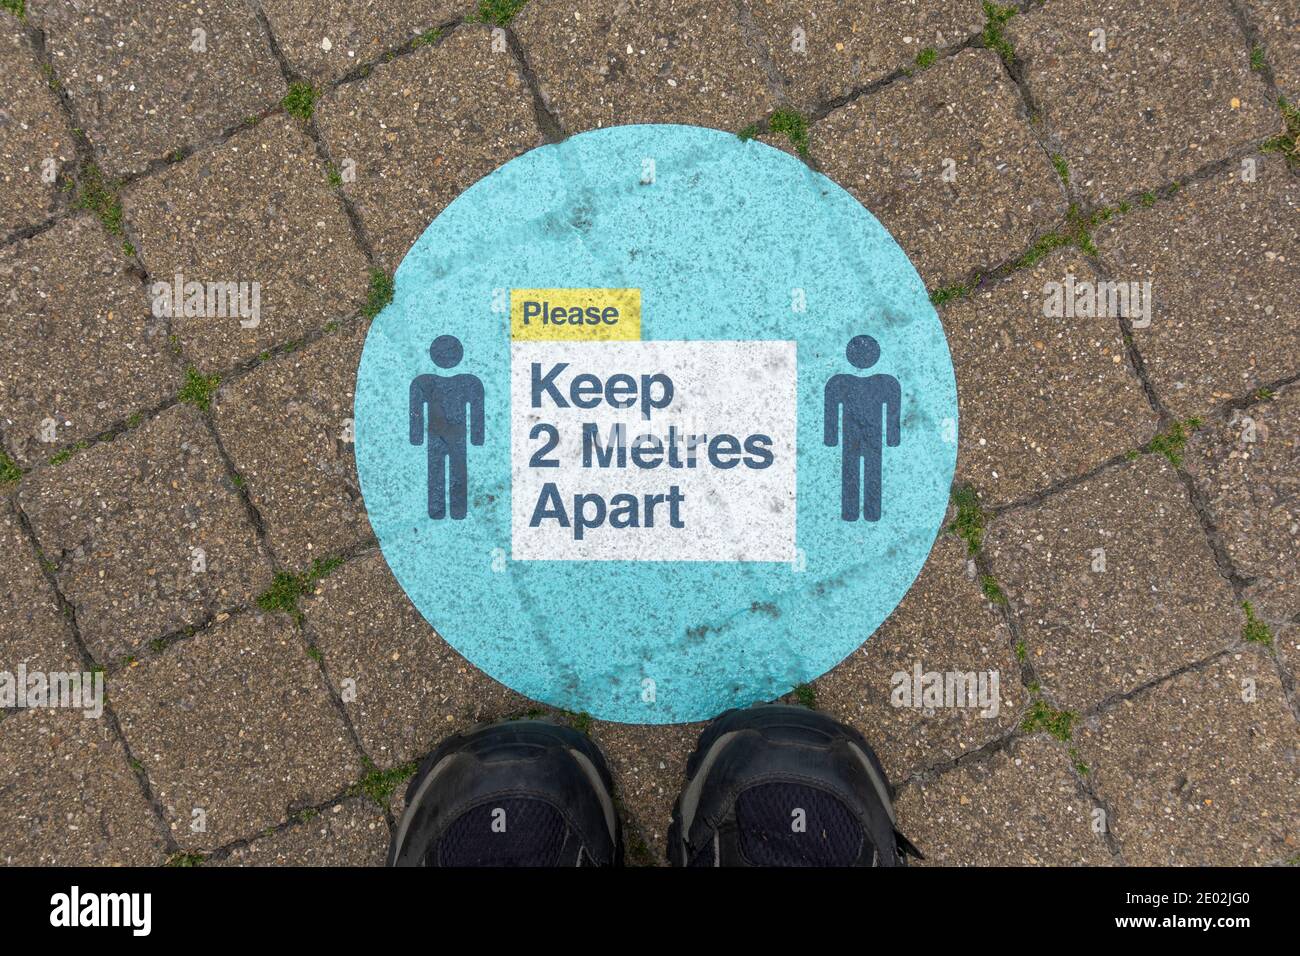 'Keep 2 metres apart' sign on the ground reminding people to socially distance during the 2020 Covid-19 pandemic, Windsor, Berkshire, UK. Stock Photo